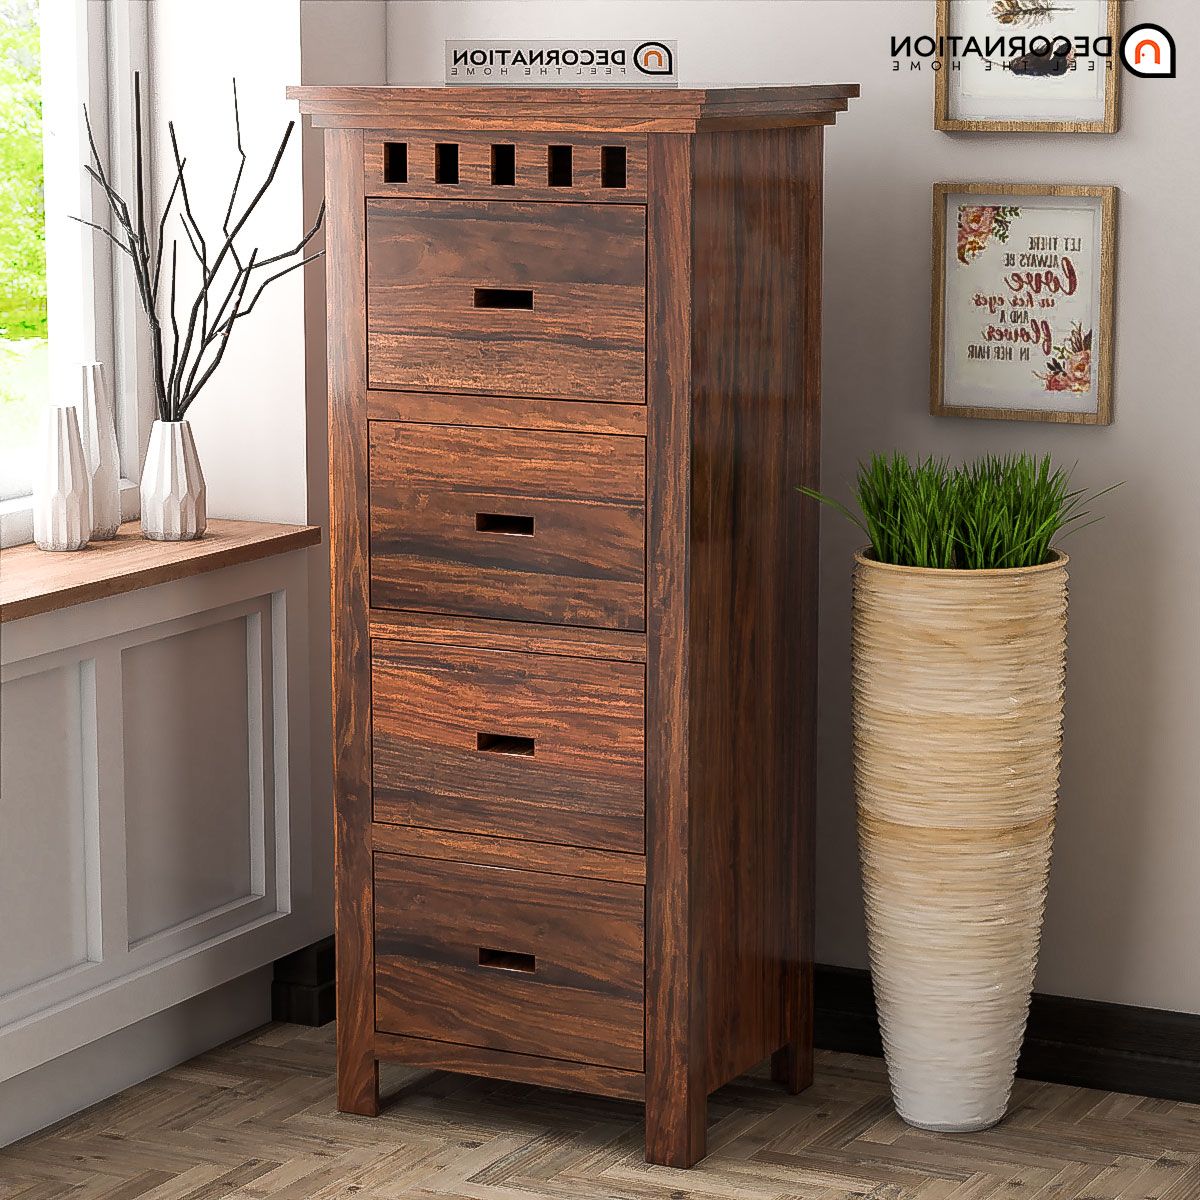 Paphos Wooden 4 Drawer Storage Cabinet – Decornation Intended For Wood Cabinet With Drawers (Gallery 2 of 20)